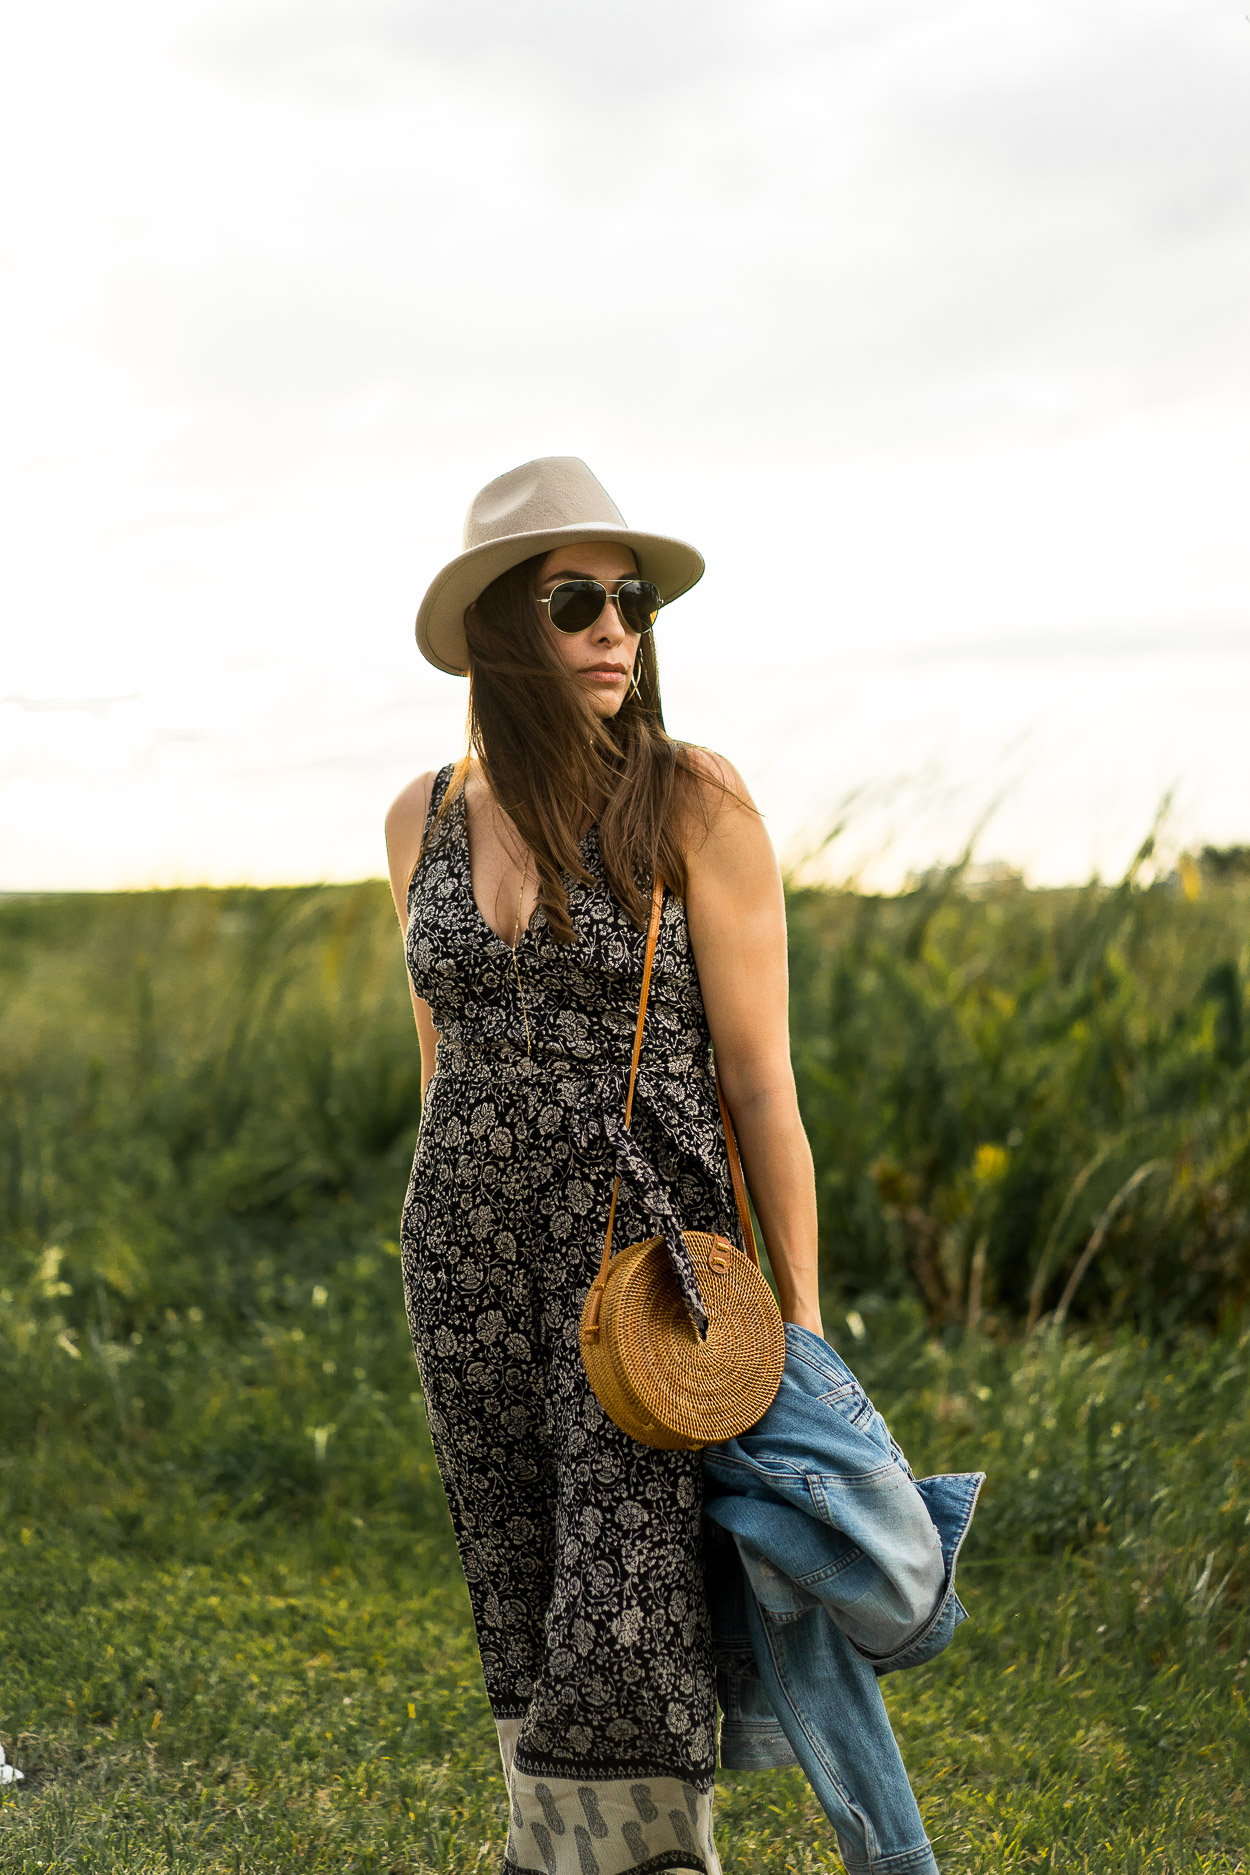 South Florida fashion blogger Amanda of A Glam Lifestyle wears boho style jumpsuit by Amuse Society with chic Summer accessories including round basket bag and classic denim jacket